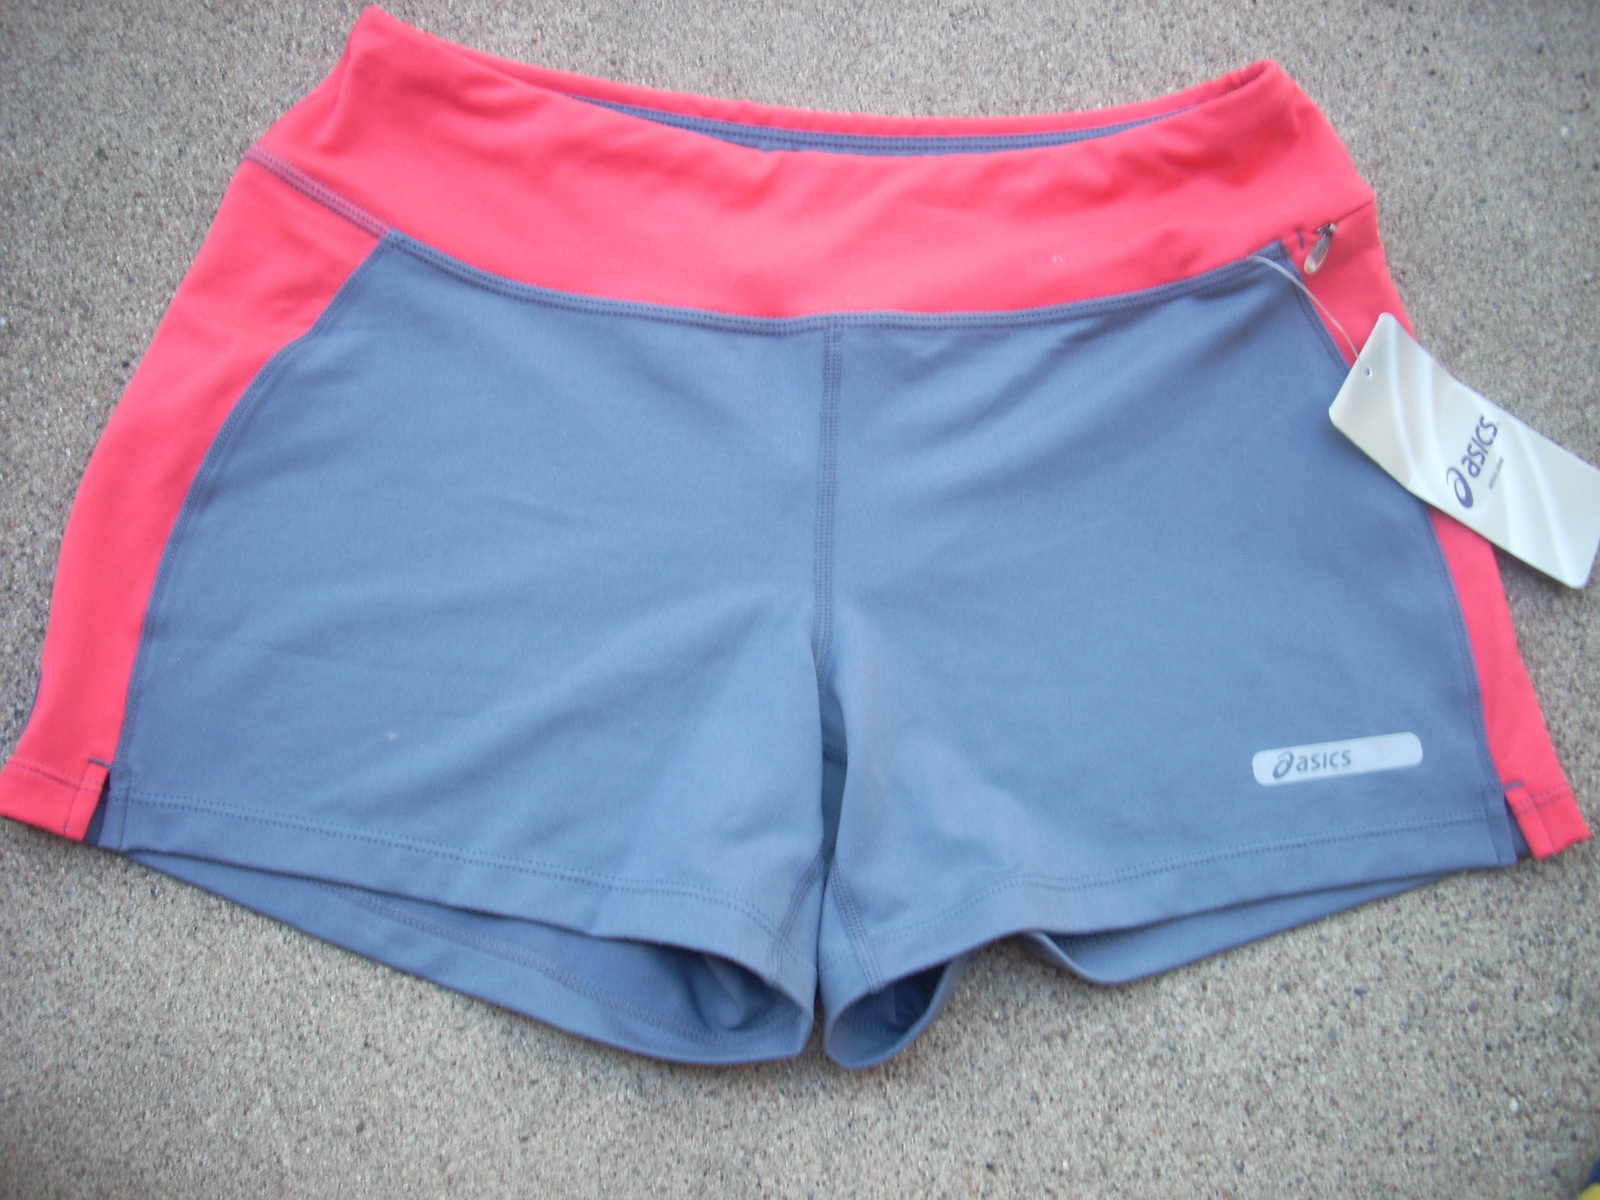 womens shorts runing asics size small gray red accent nwt - $32.00